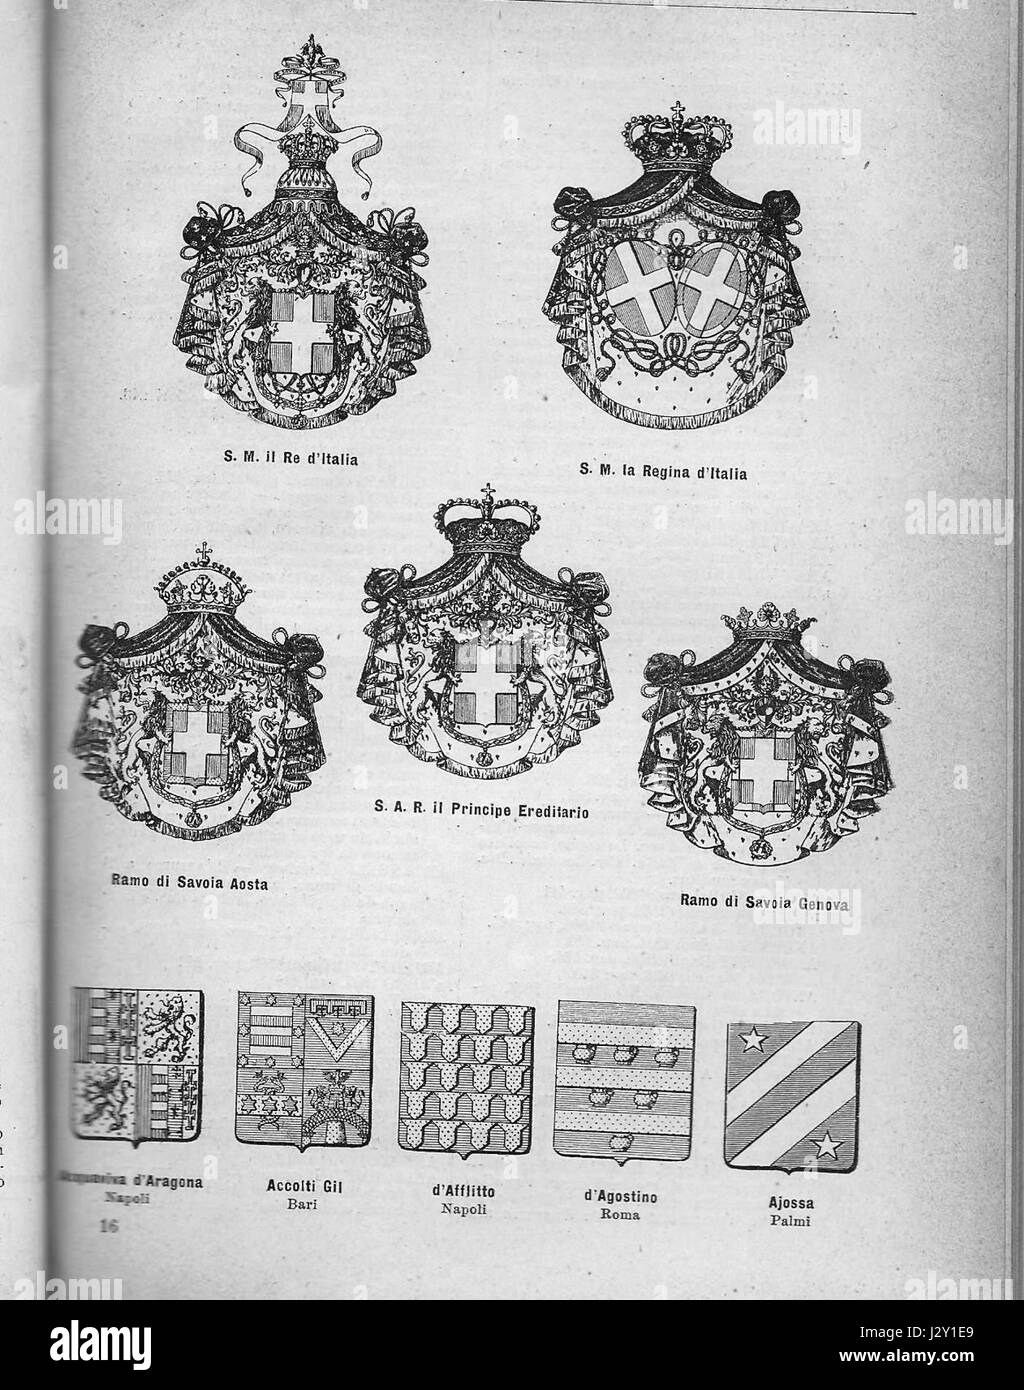 Calendrier d'oro 1900 - Page 233 Banque D'Images